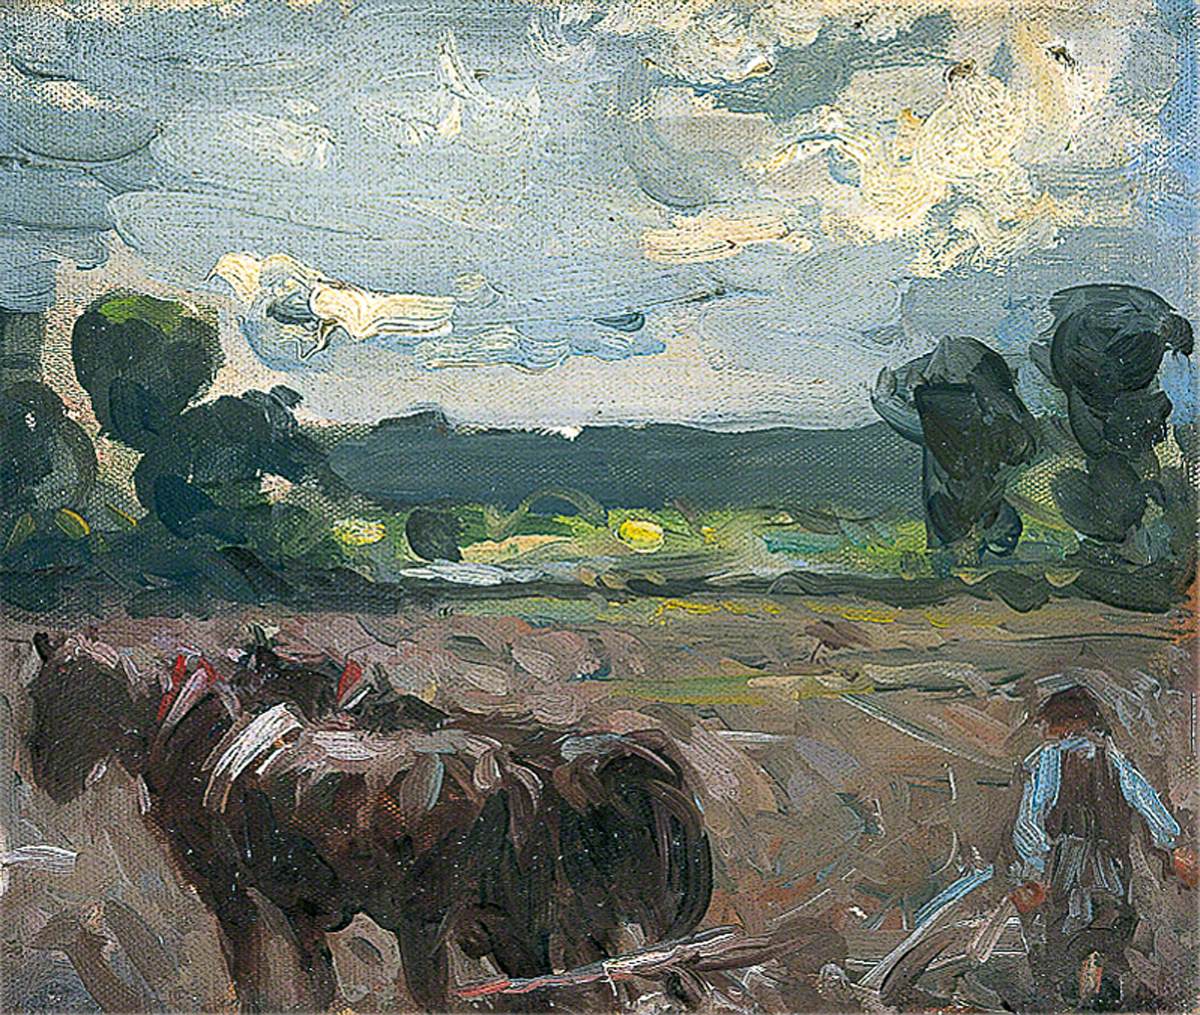 Landscape with Horses Ploughing